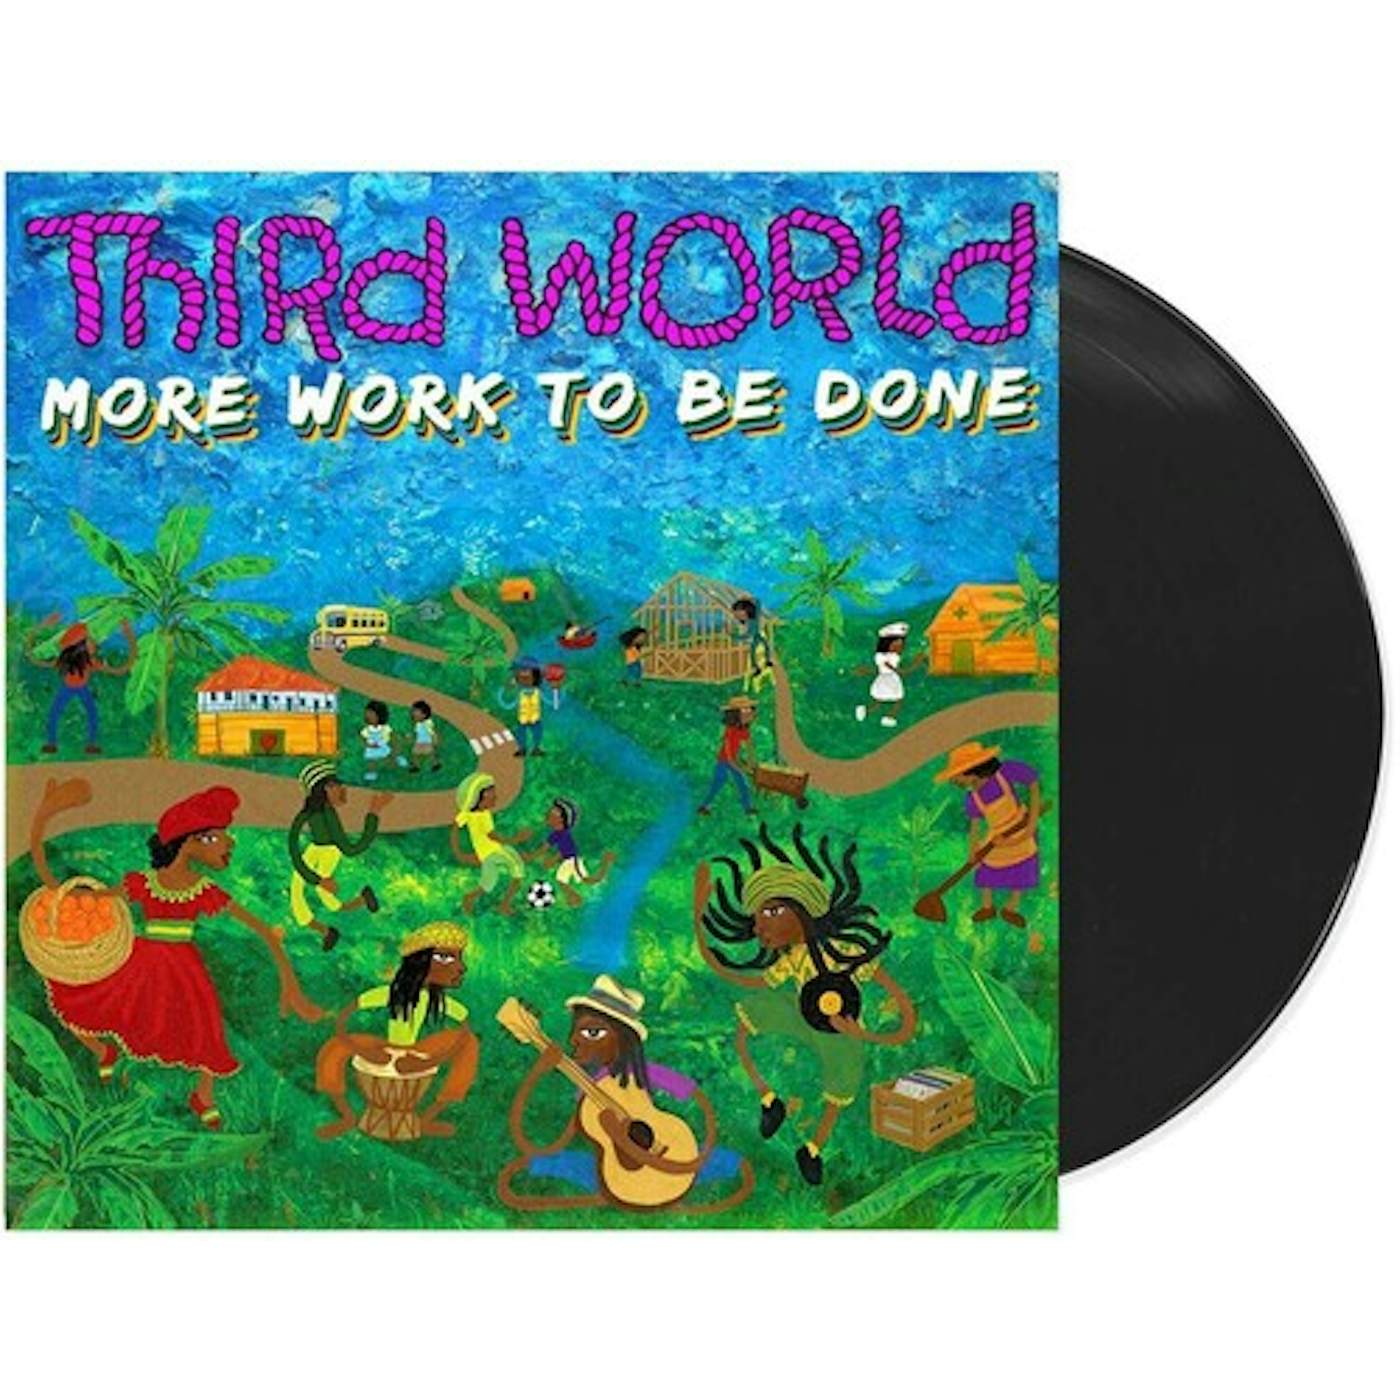 Third World More Work to Be Done Vinyl Record